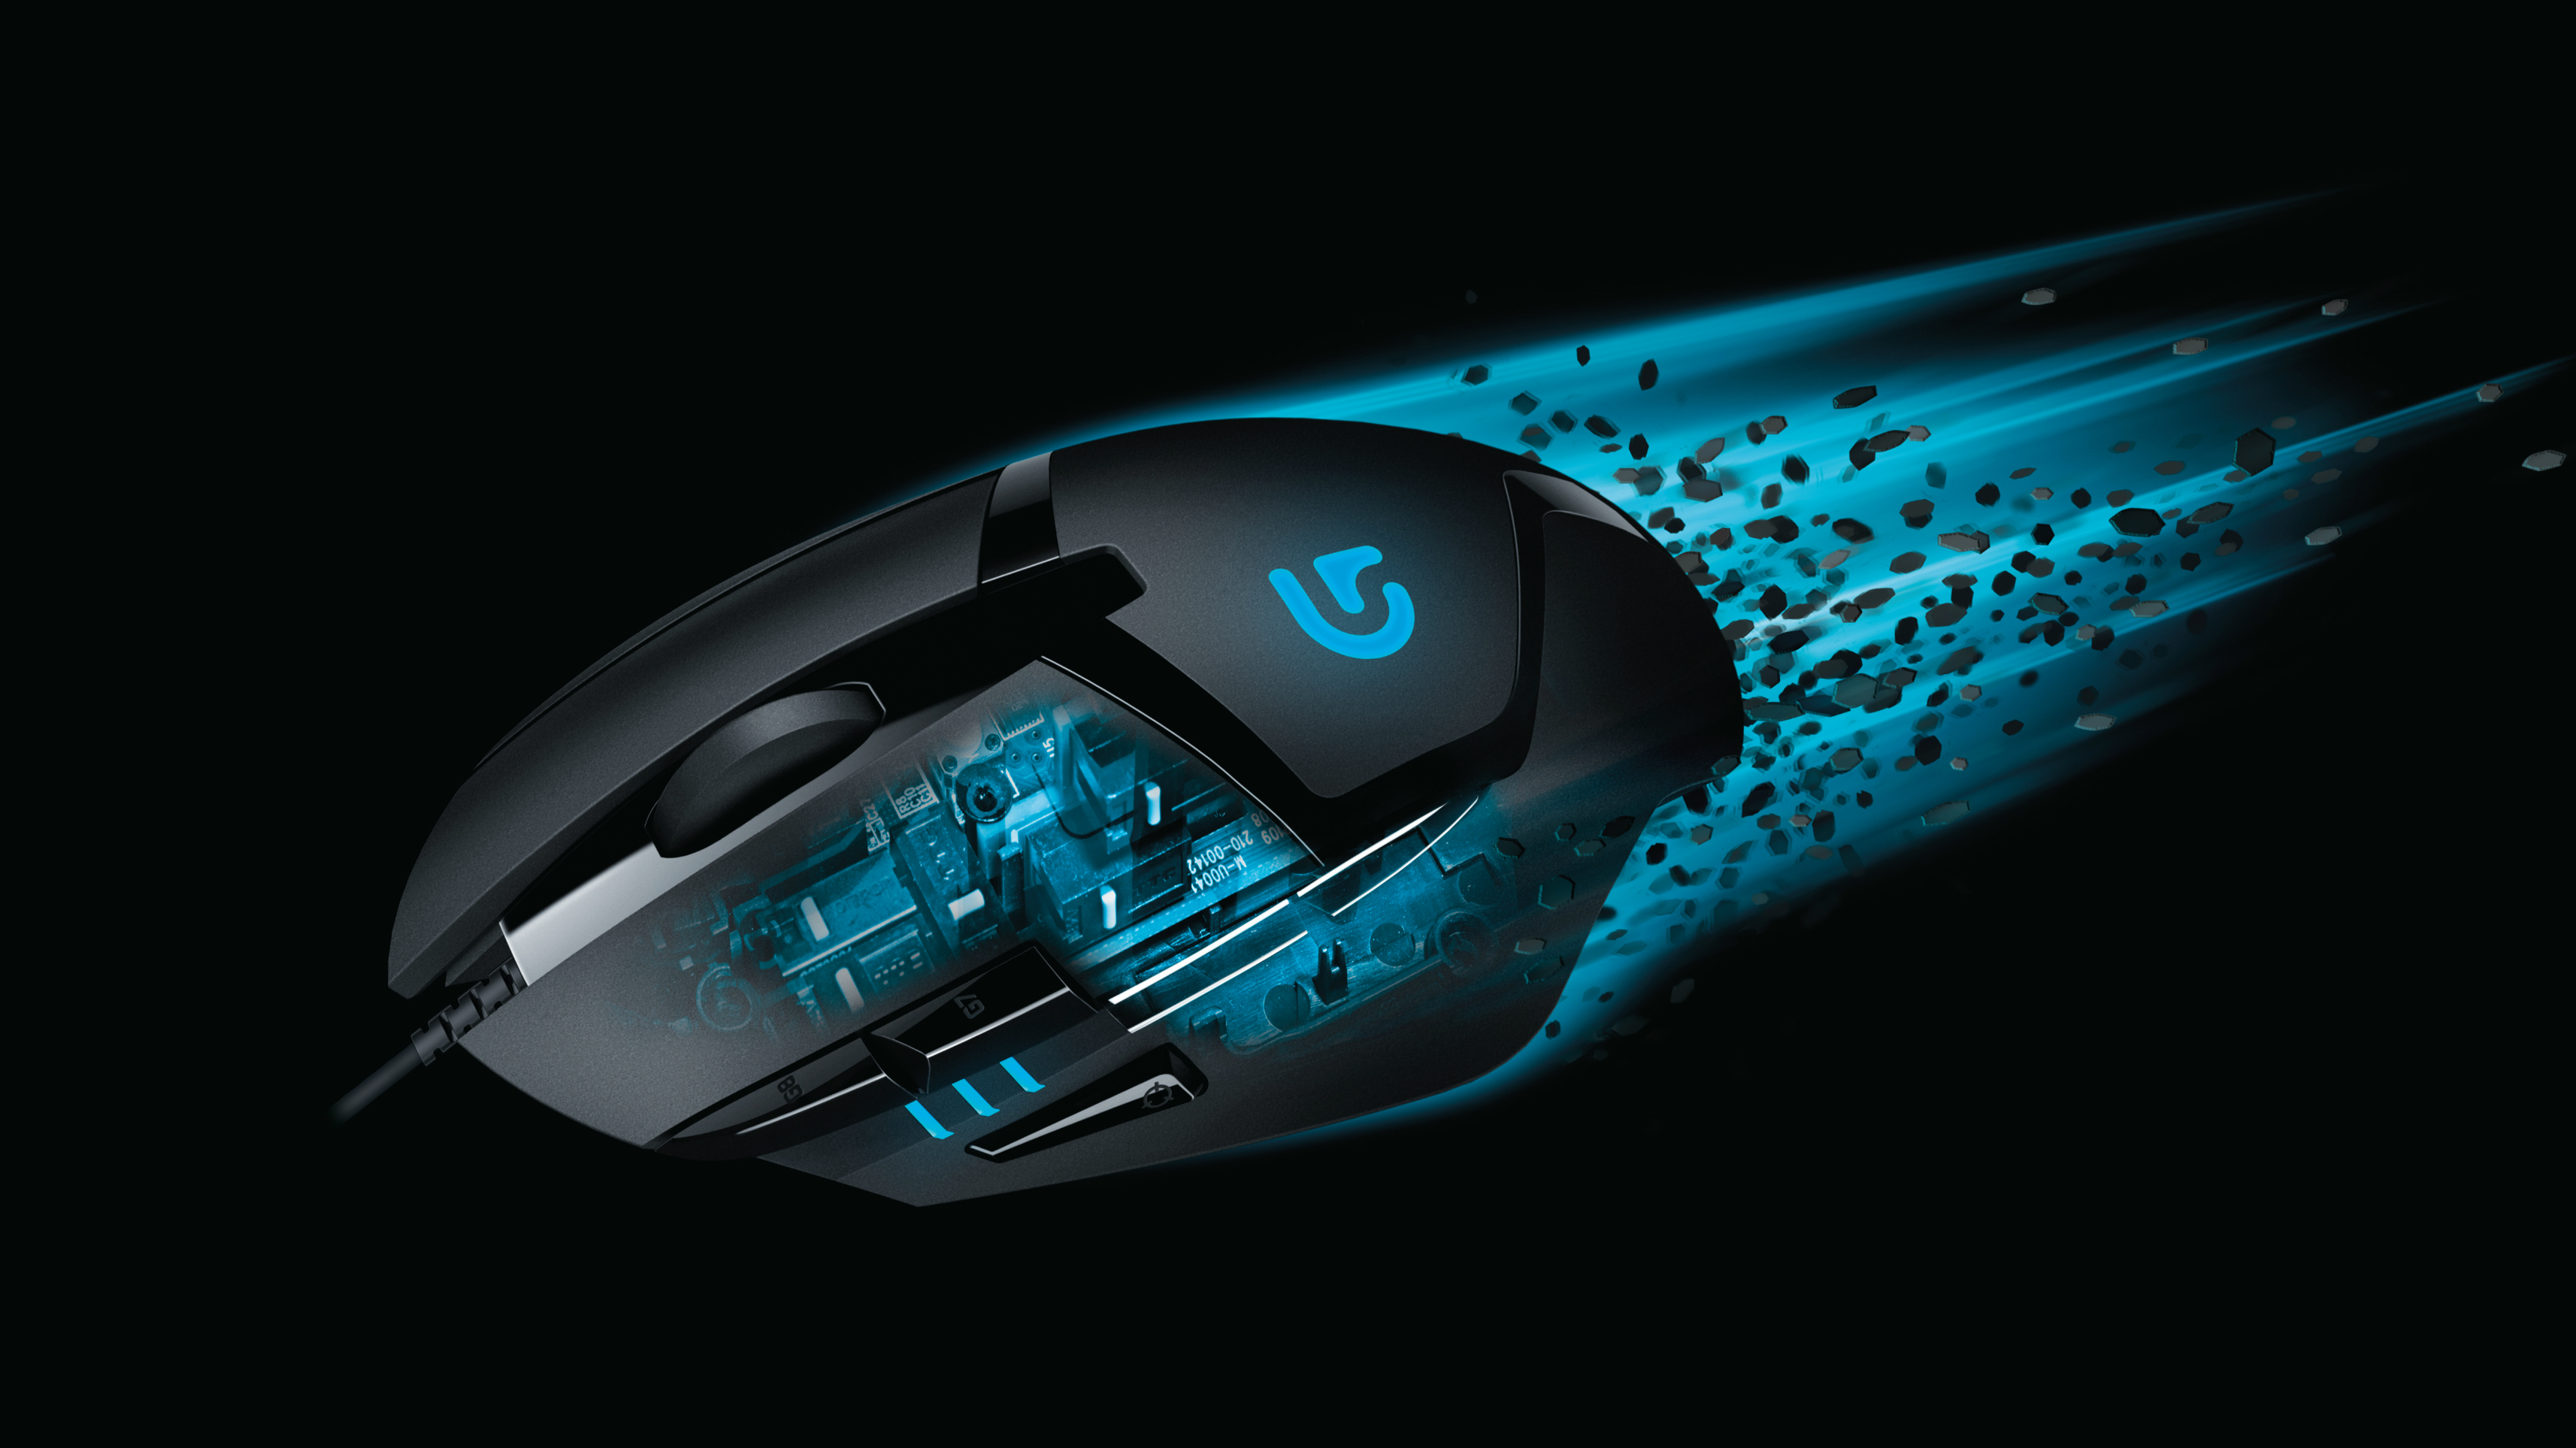 Logitech Unveils World S Fastest Gaming Mouse The G402 Hyperion Fury Techradar